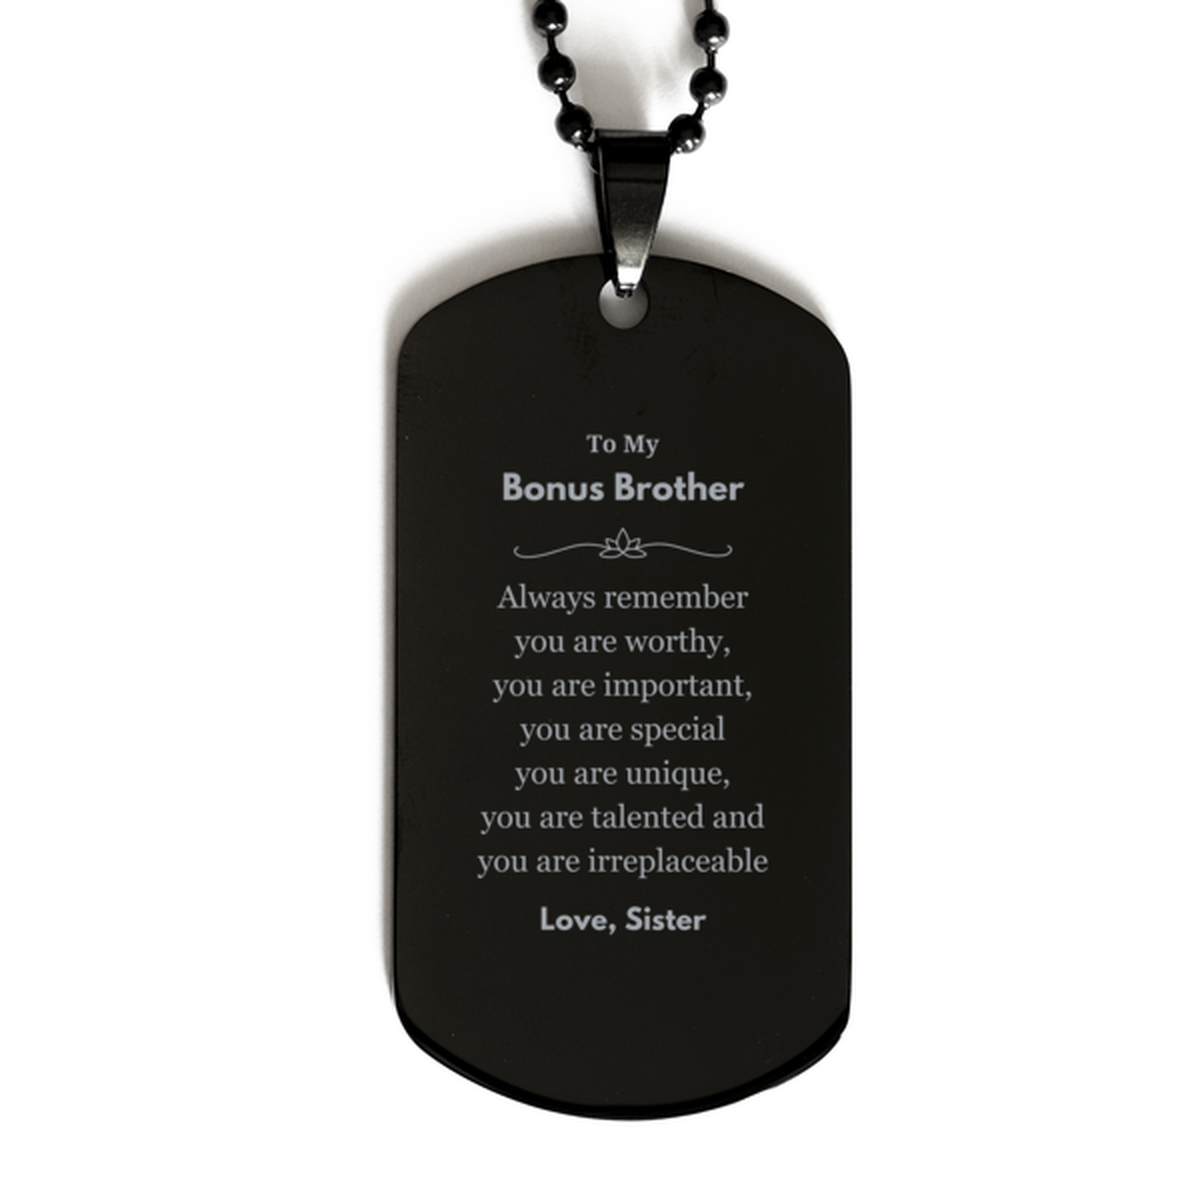 Bonus Brother Birthday Gifts from Sister, Inspirational Black Dog Tag for Bonus Brother Christmas Graduation Gifts for Bonus Brother Always remember you are worthy, you are important. Love, Sister